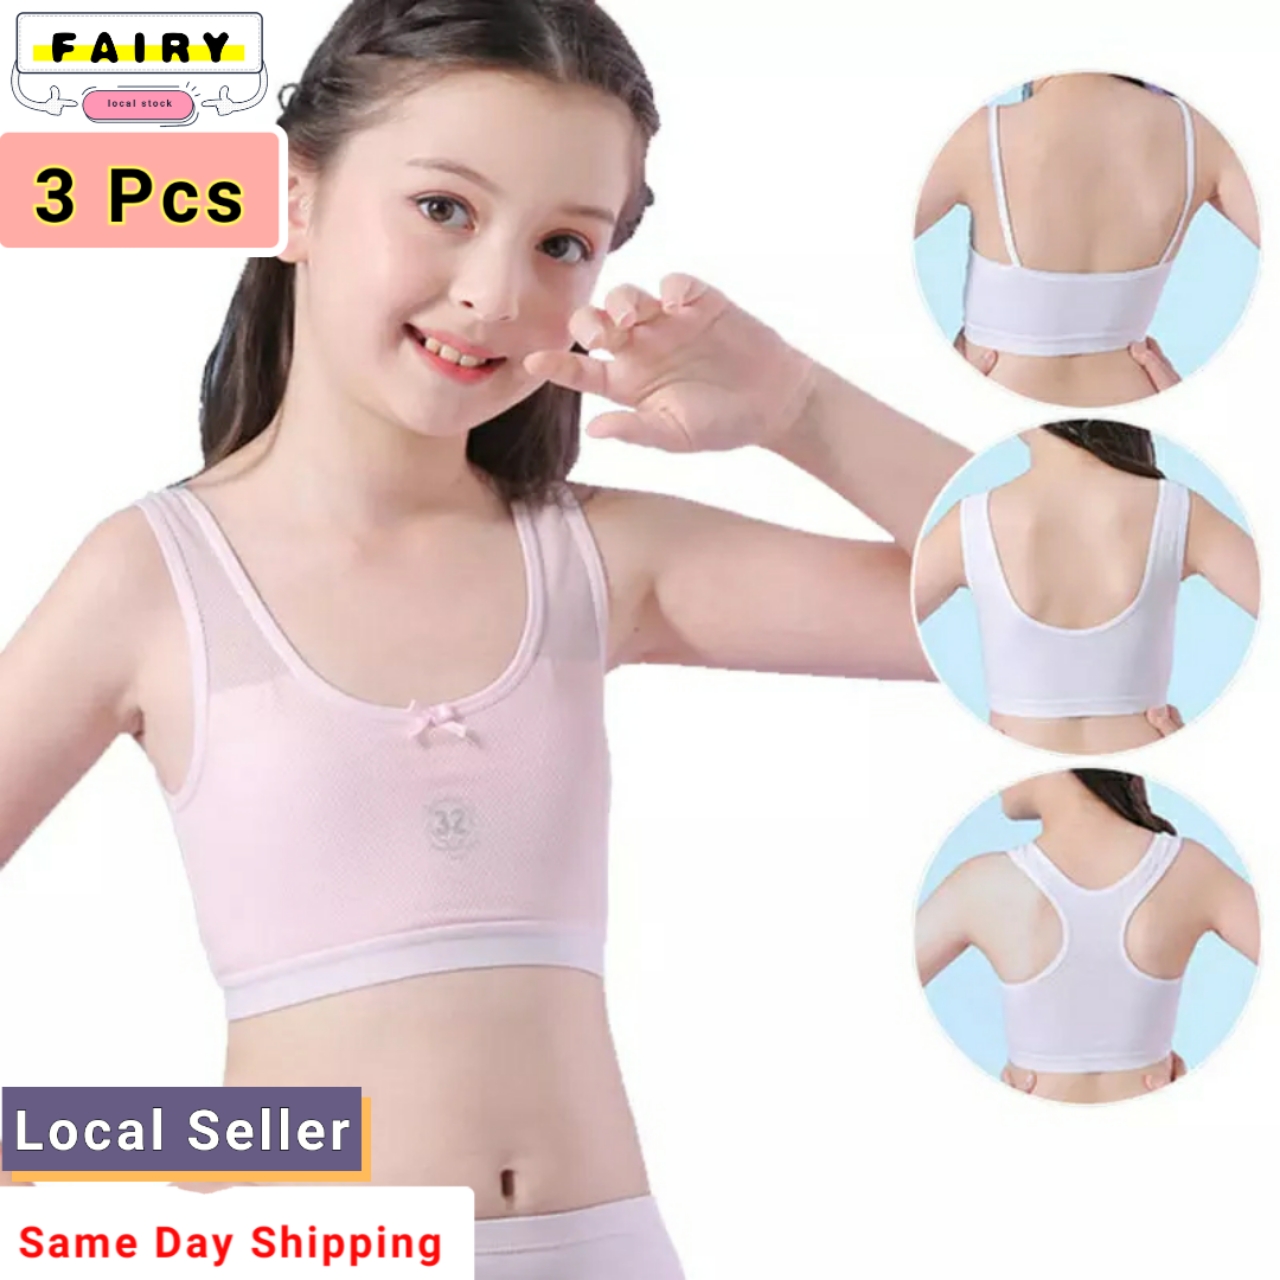 Buy YouGotPlanB Inner Padded Camisoles for Girls, Multicolour Colors, Regular Fit, Cotton Blend, Soft & Stretchy, Beginners/Teenager Camisole  for Puberty, 8-14 Years